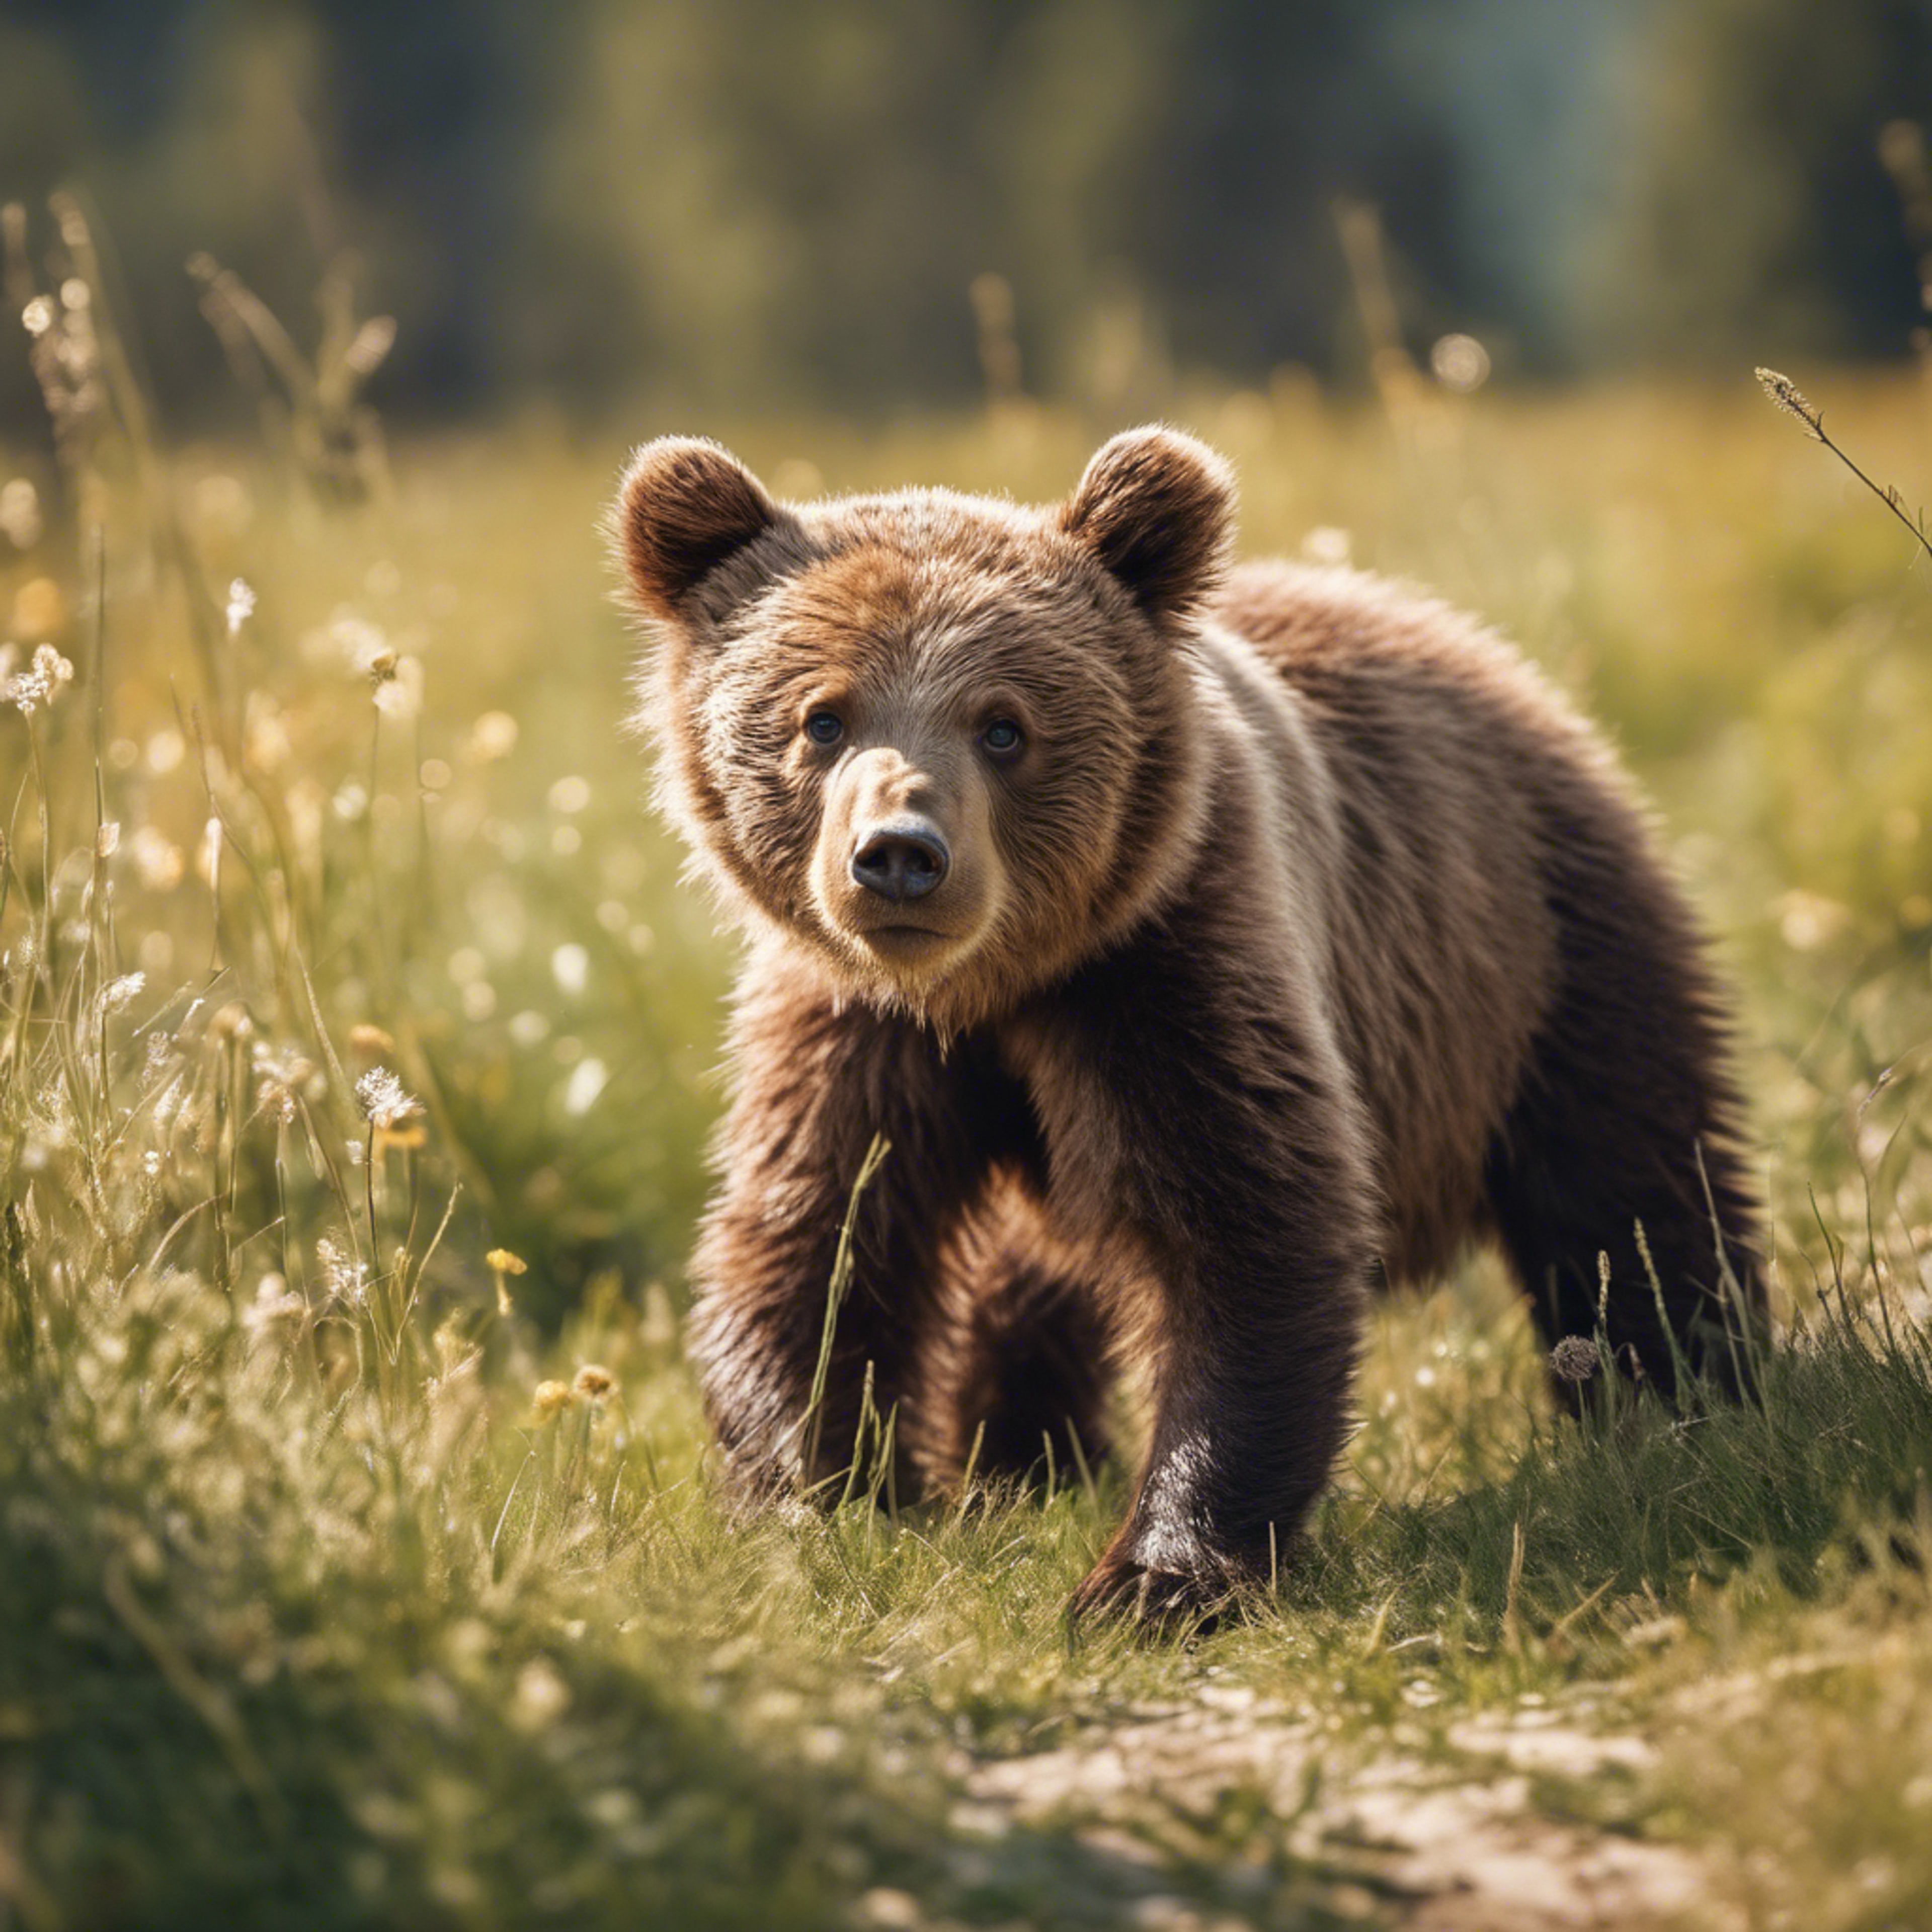 A baby brown bear playing in a sunny meadow Hintergrund[71f2781006124793bc52]